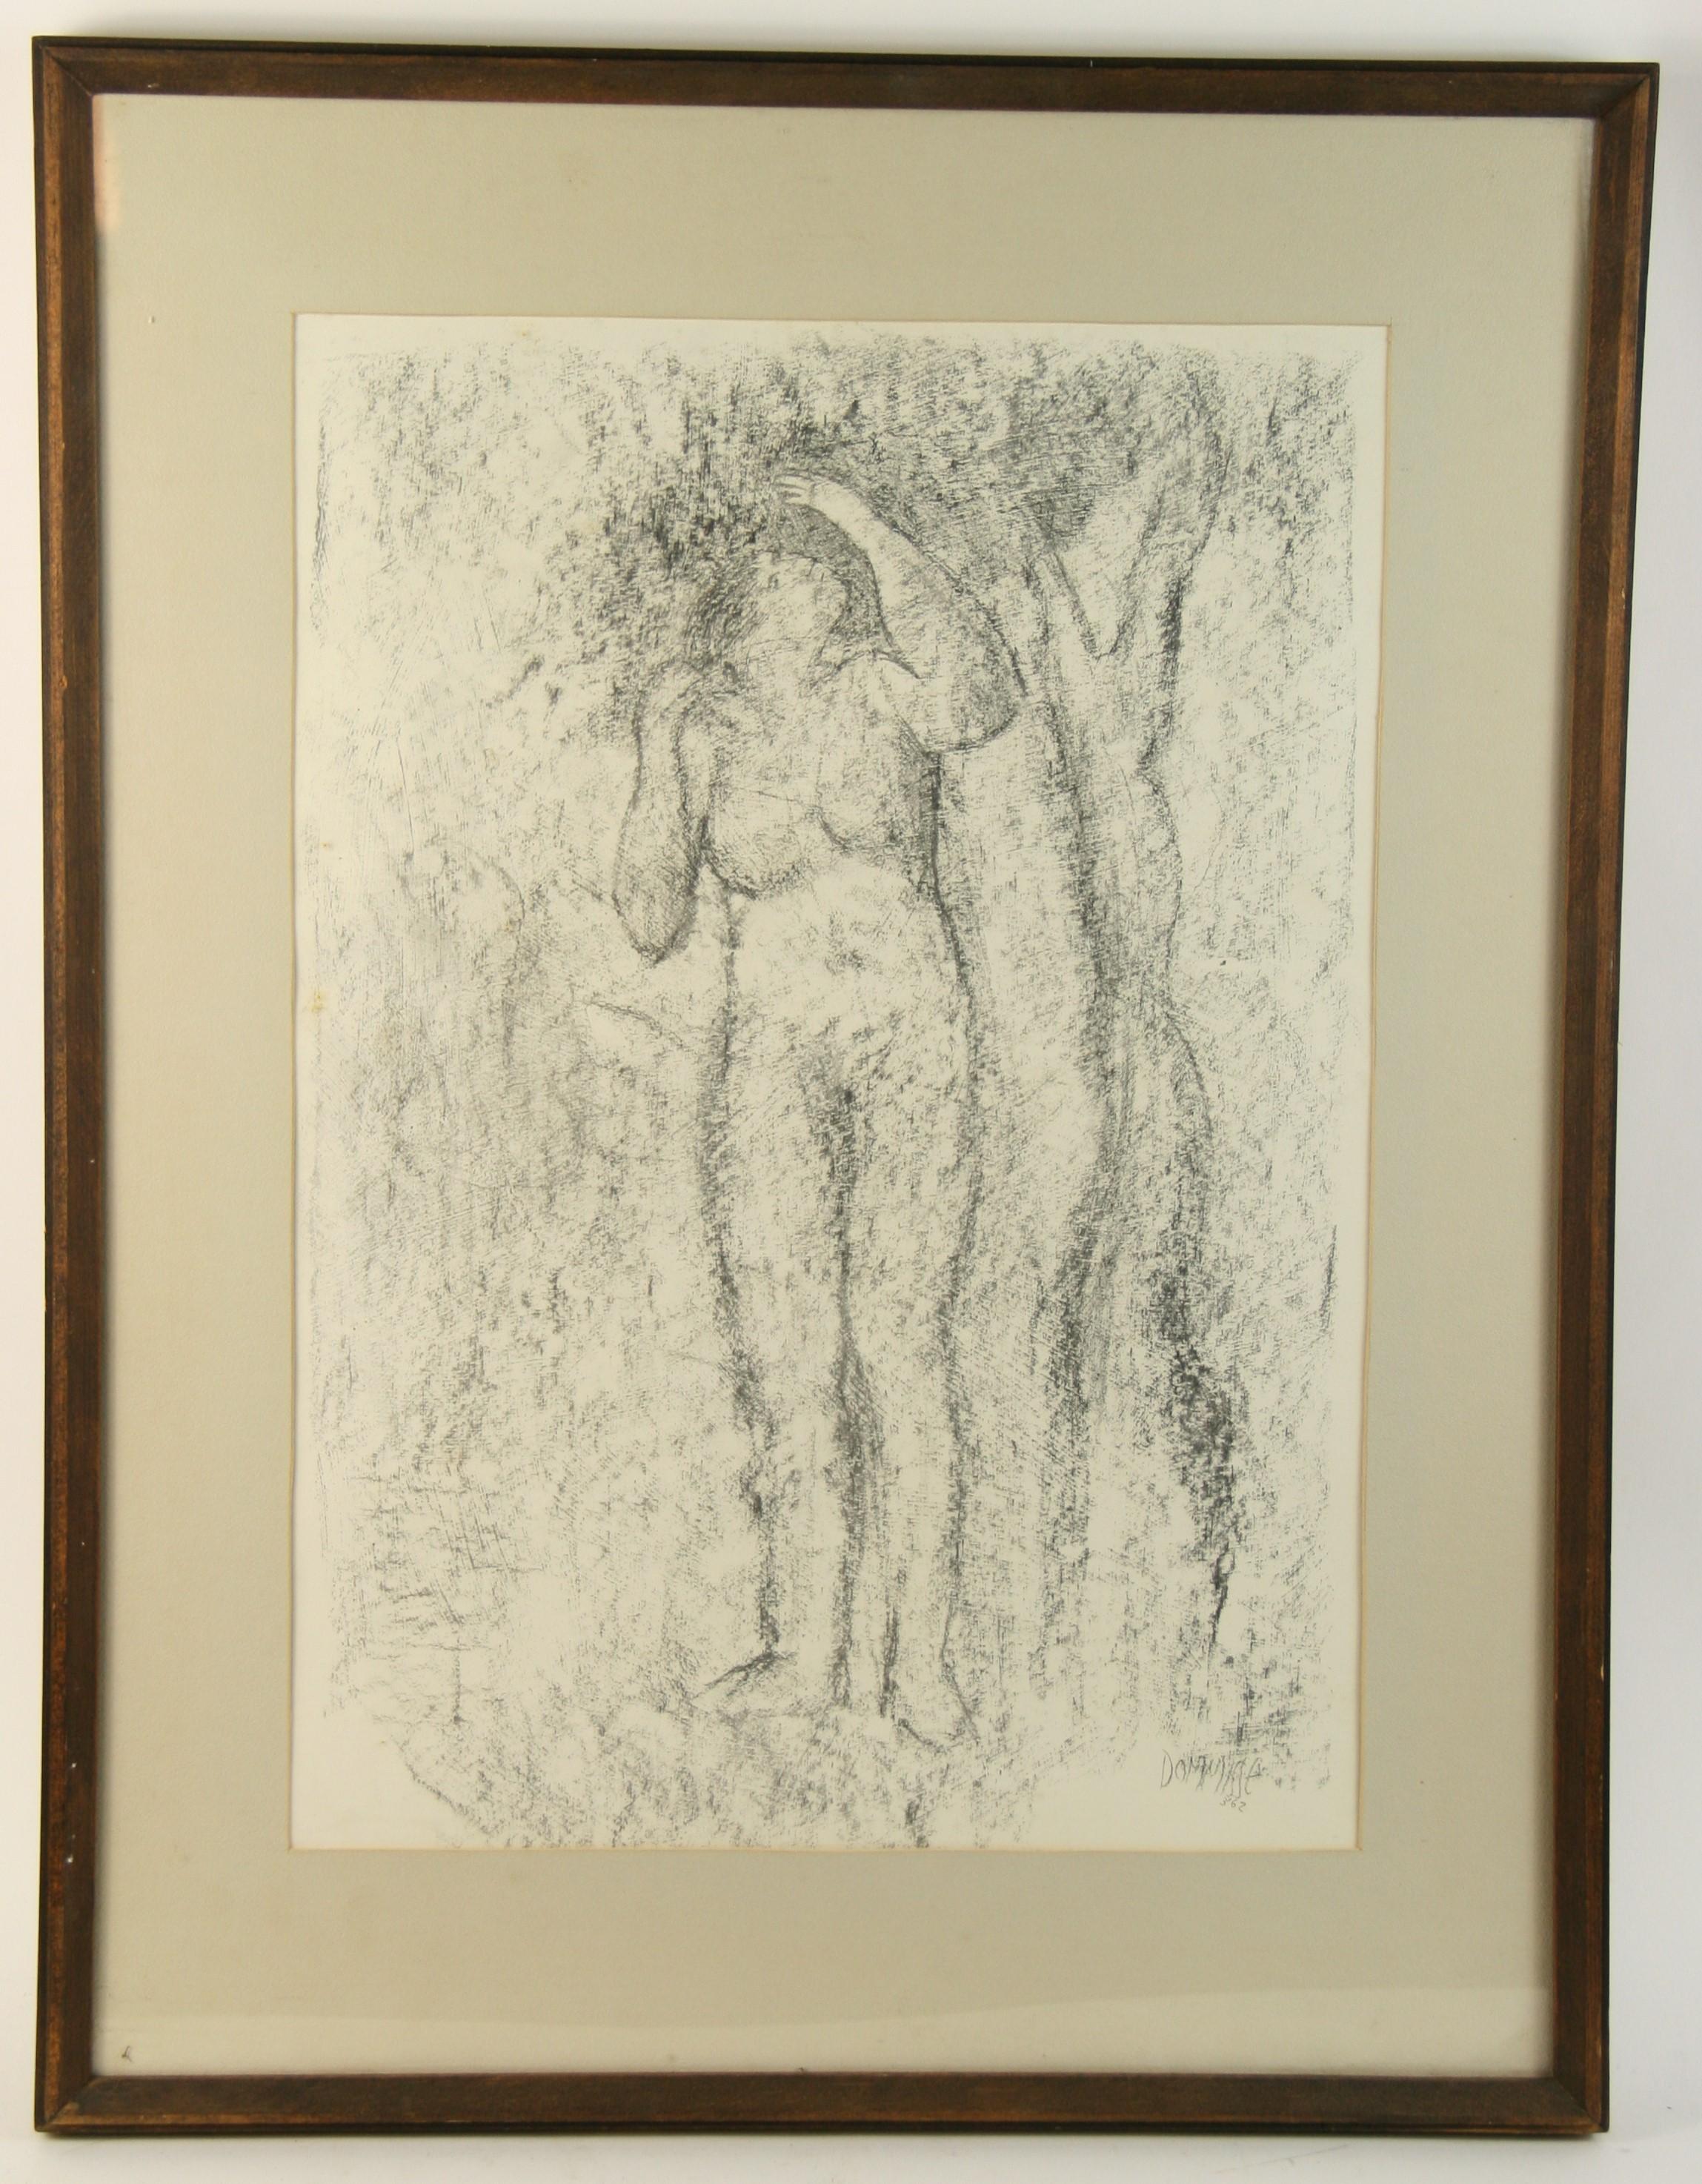 3761  Drawing of a nude woman under a tree
Set in a solid oak frame
Image size 15x22
Signed Dommisse 62 